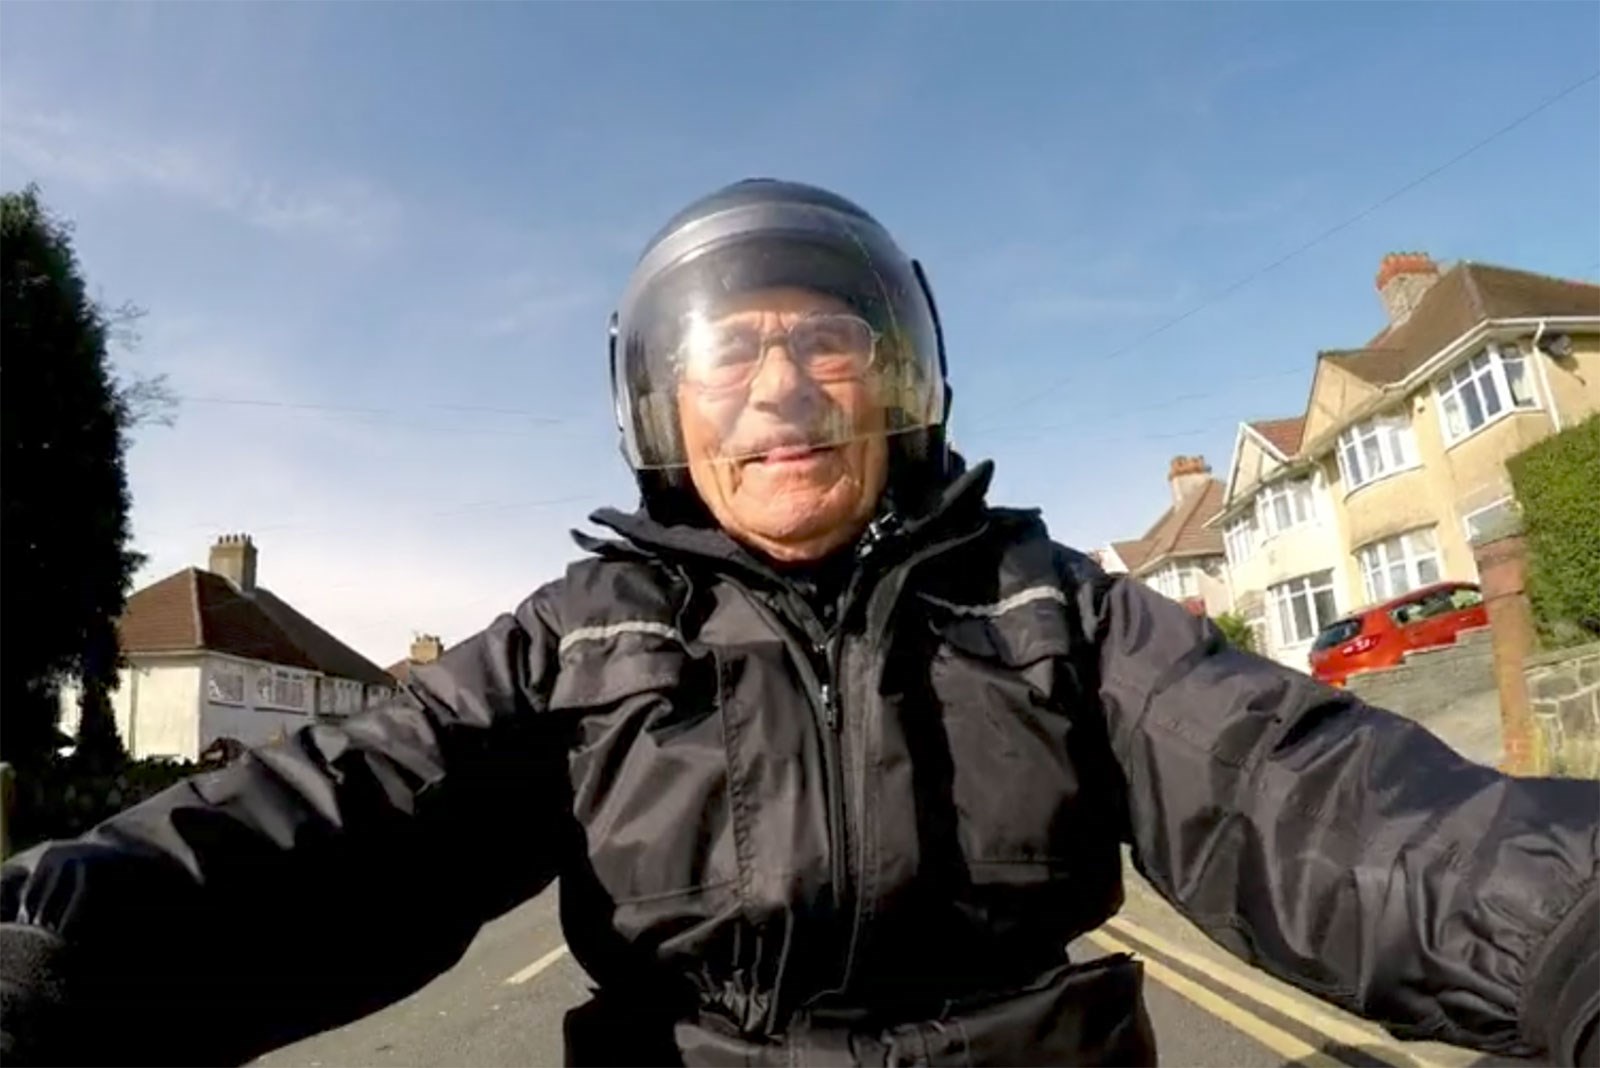 101 year old motorcyclist